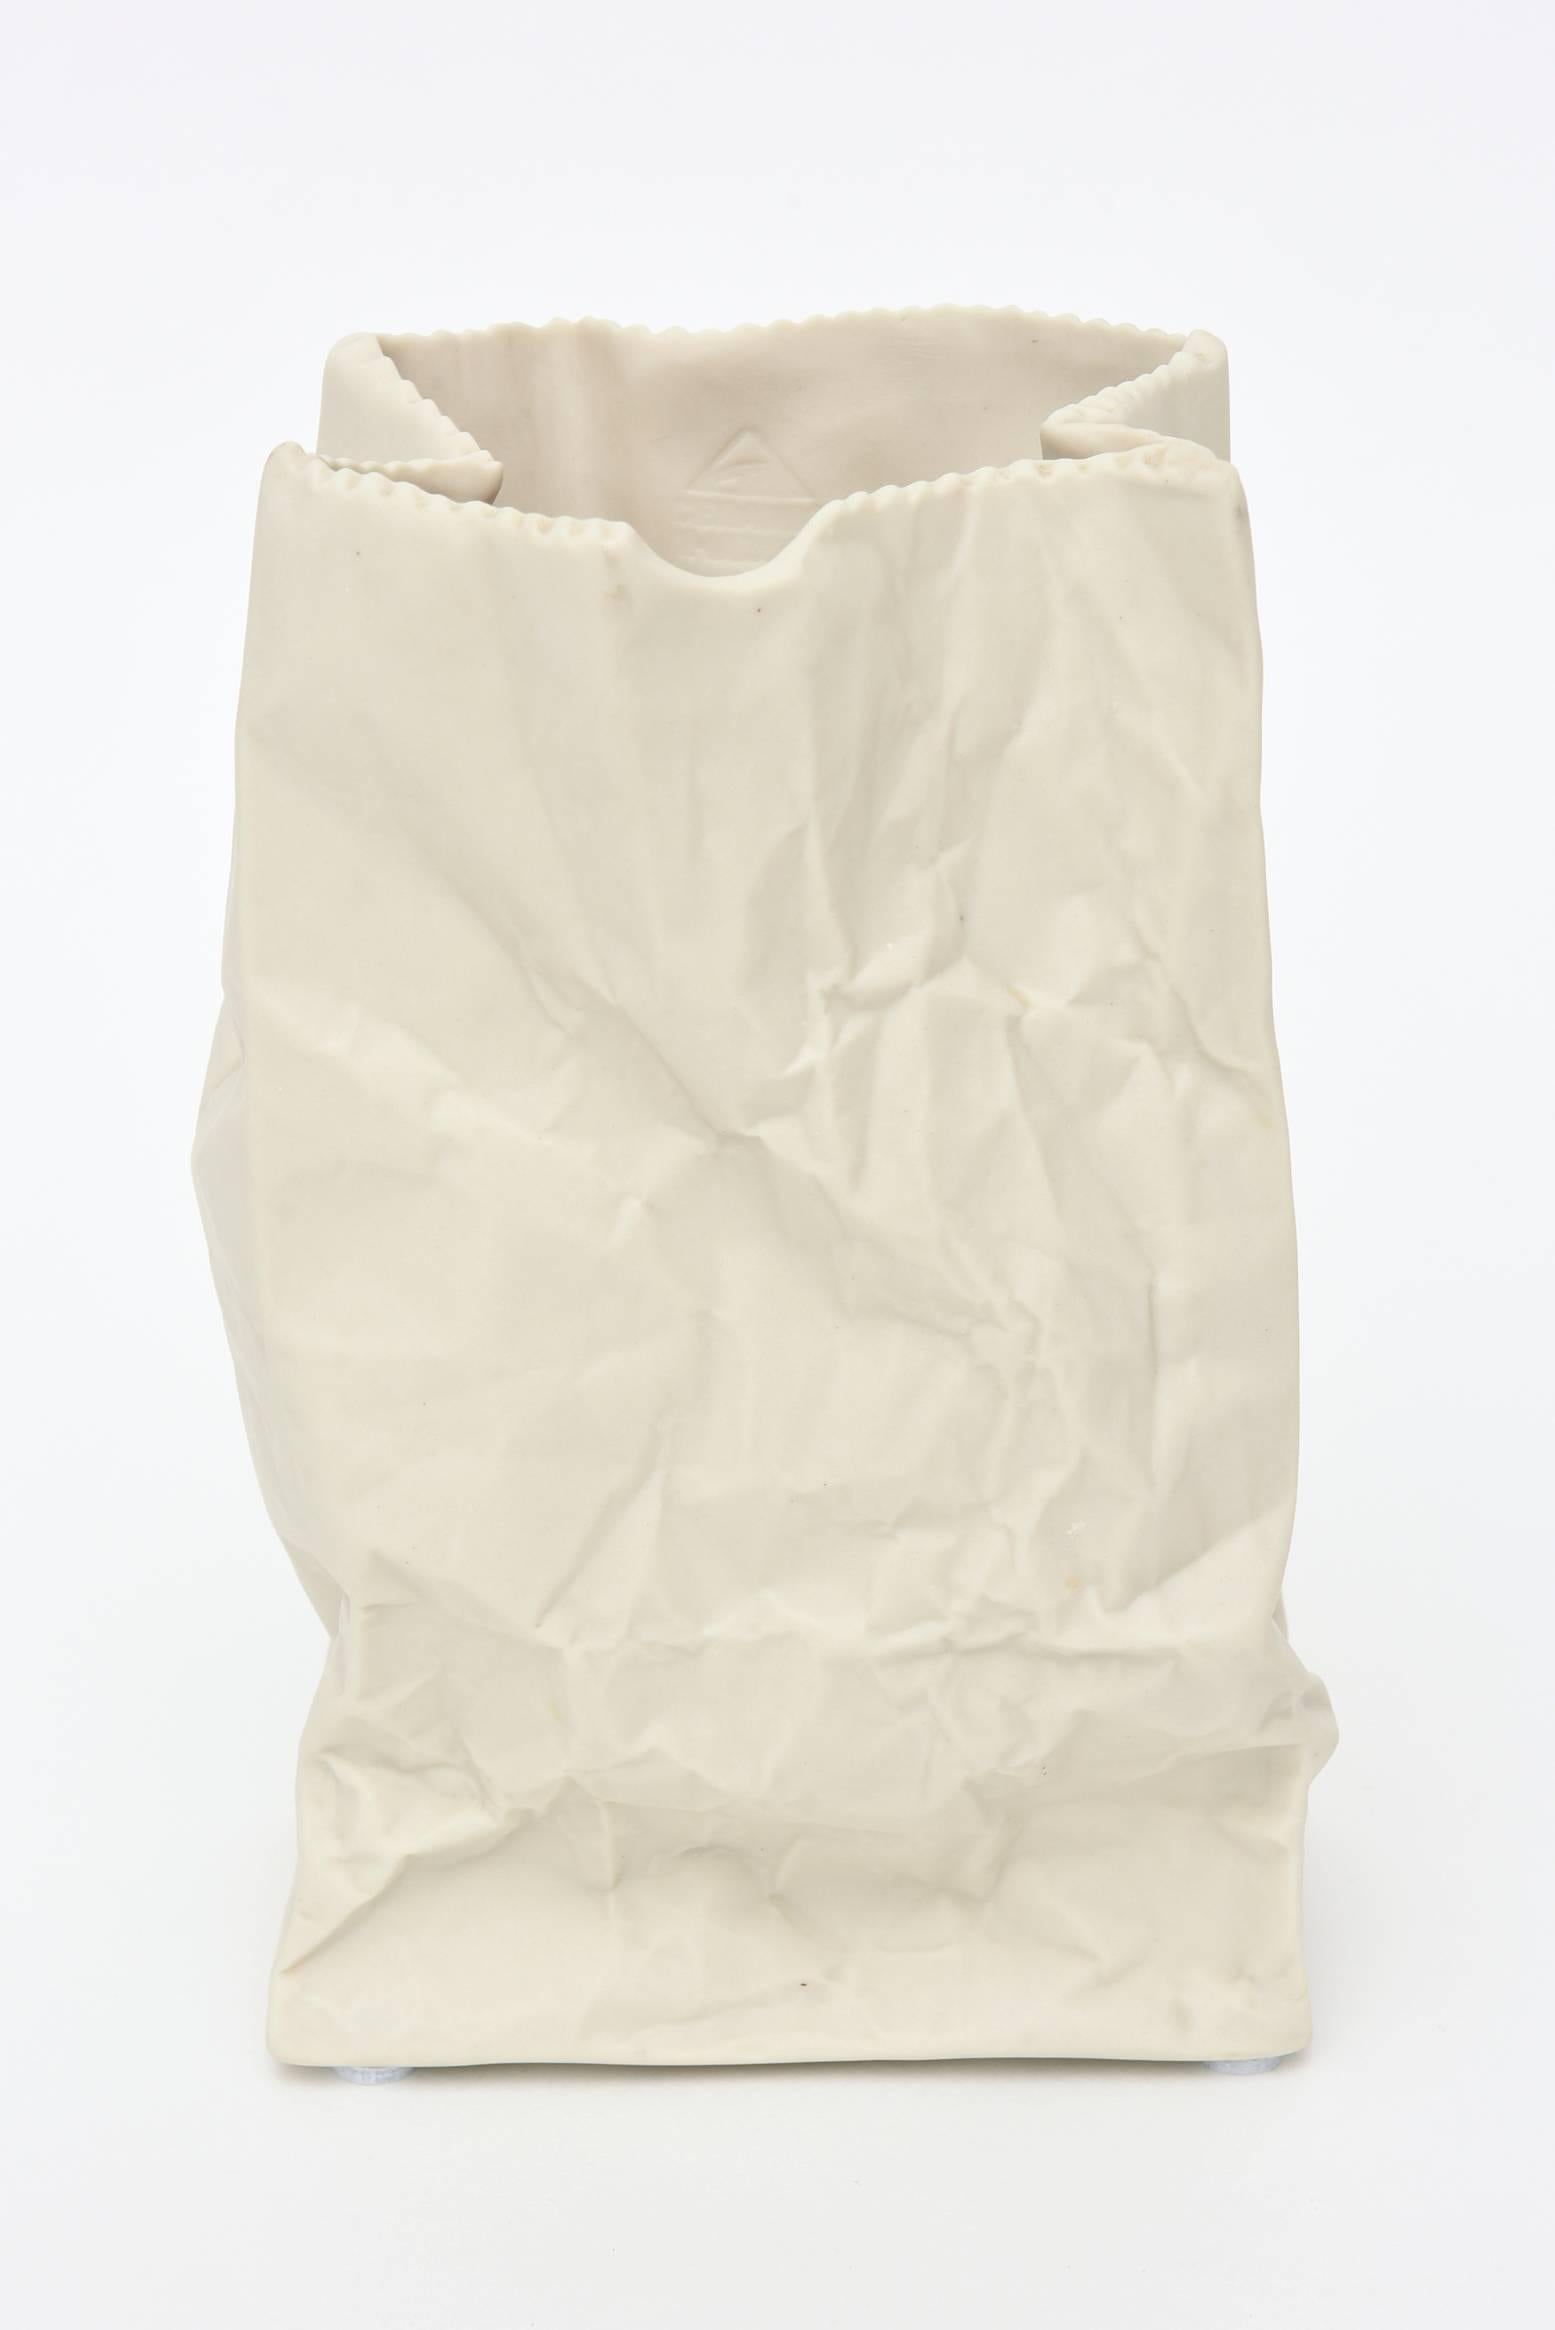 This off-white ceramic sculptural crushed bag is a great vase or just a great object/sculpture. It has the influence of Claes Oldenburg: pop artist.
It is from a California company and resembles the Rosenthal bag. This one is bigger. It is organic